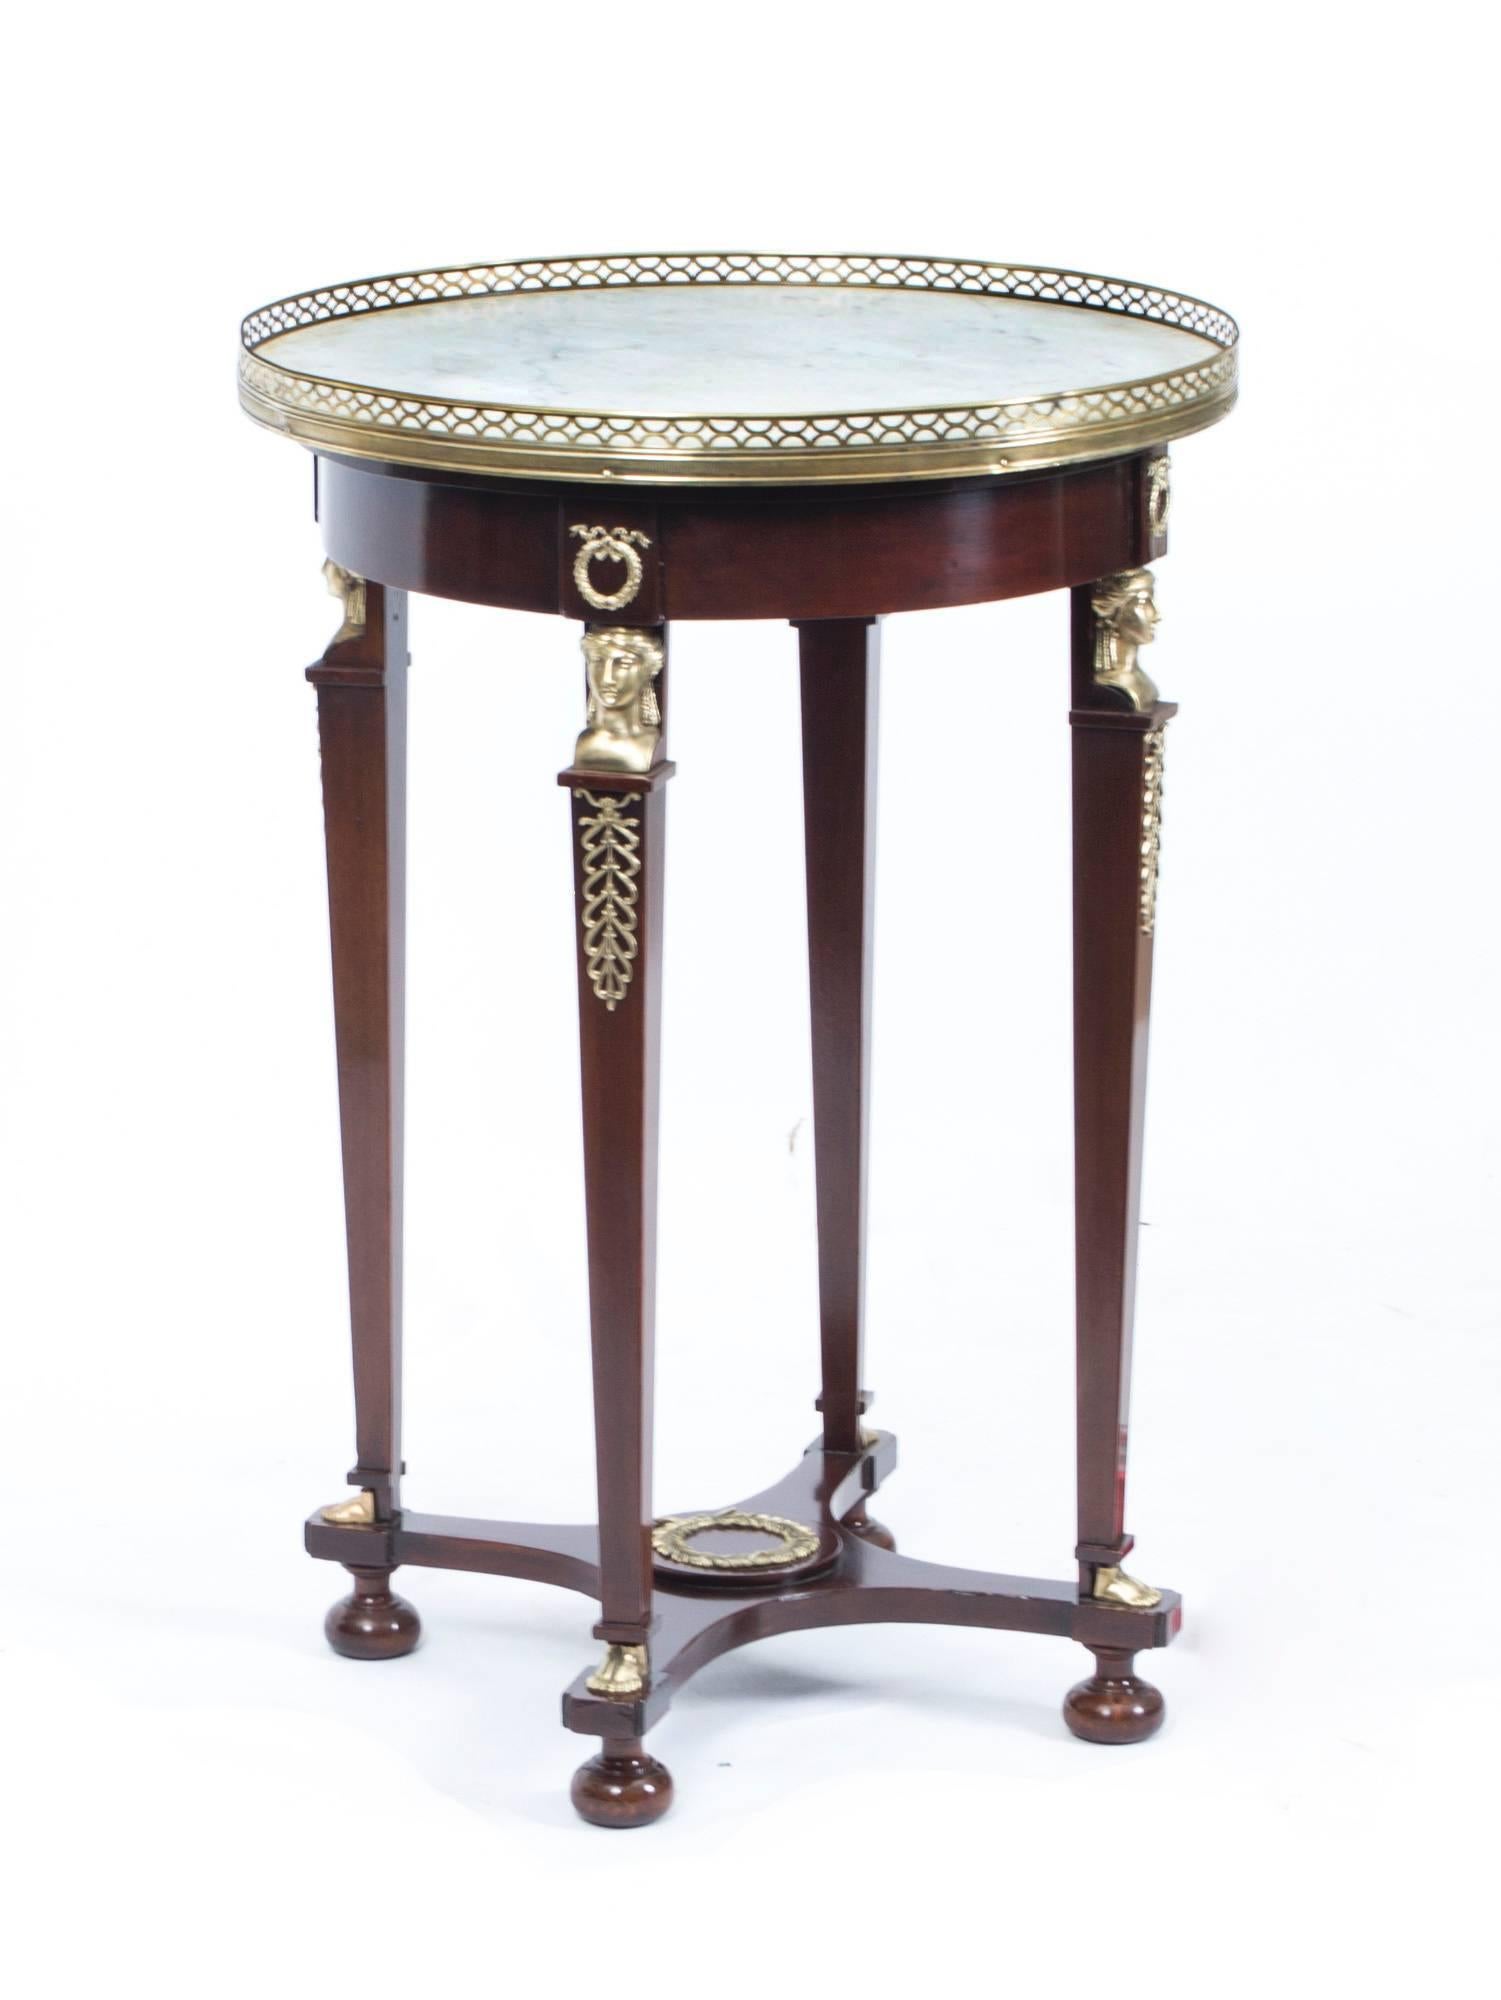 19th Century French Empire White Marble & Ormolu Occasional Table 5